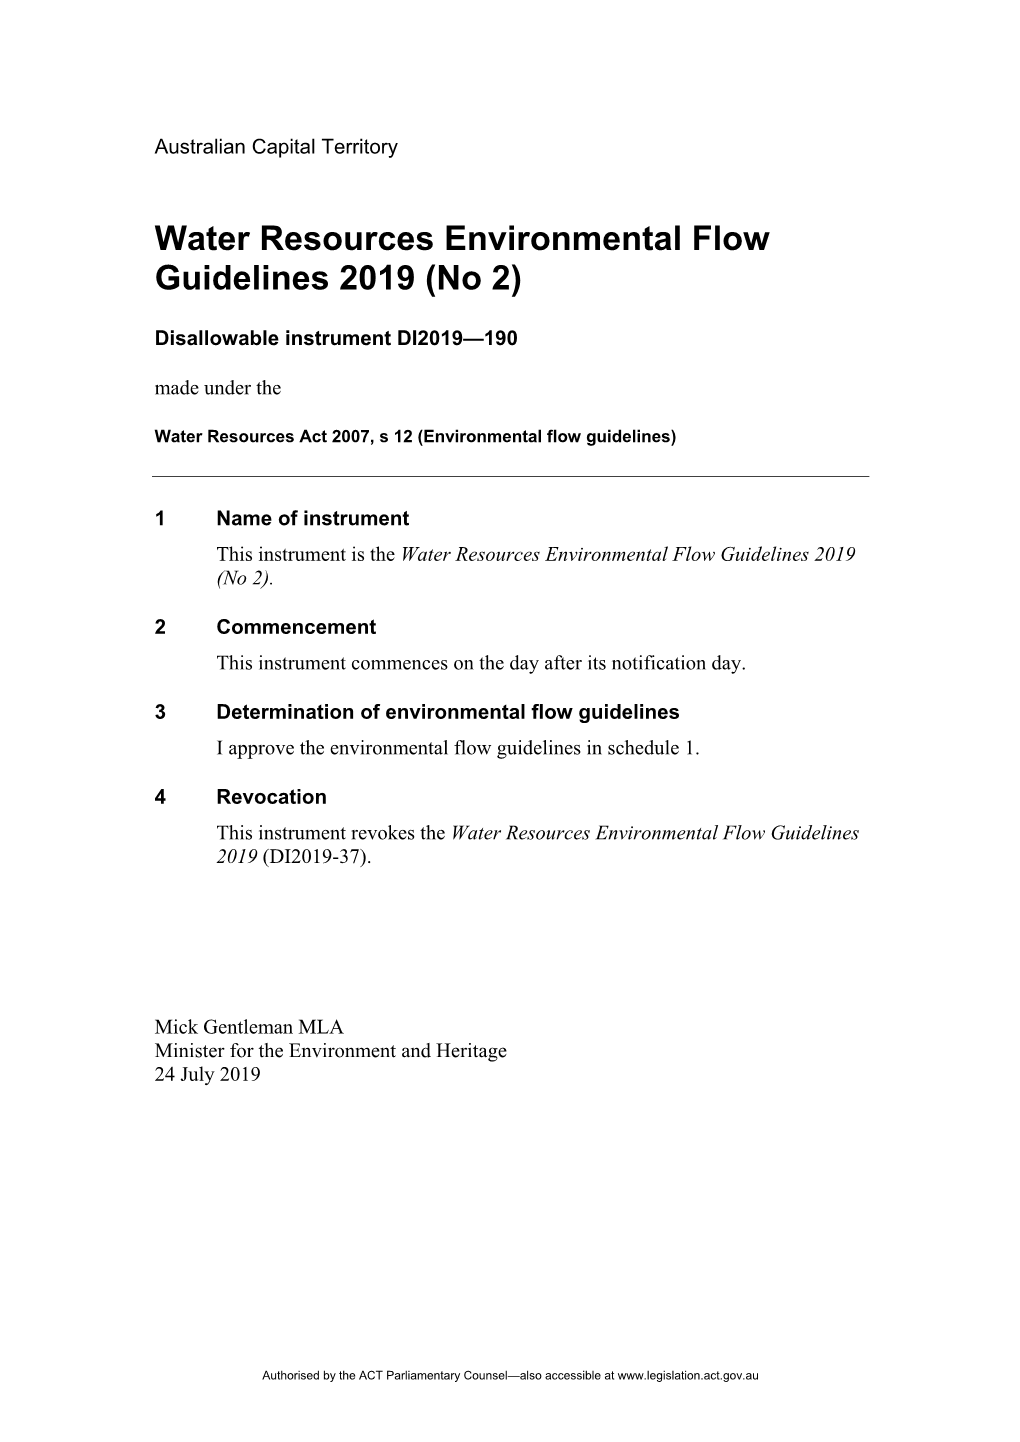 Water Resources Environmental Flow Guidelines 2019 (No 2)